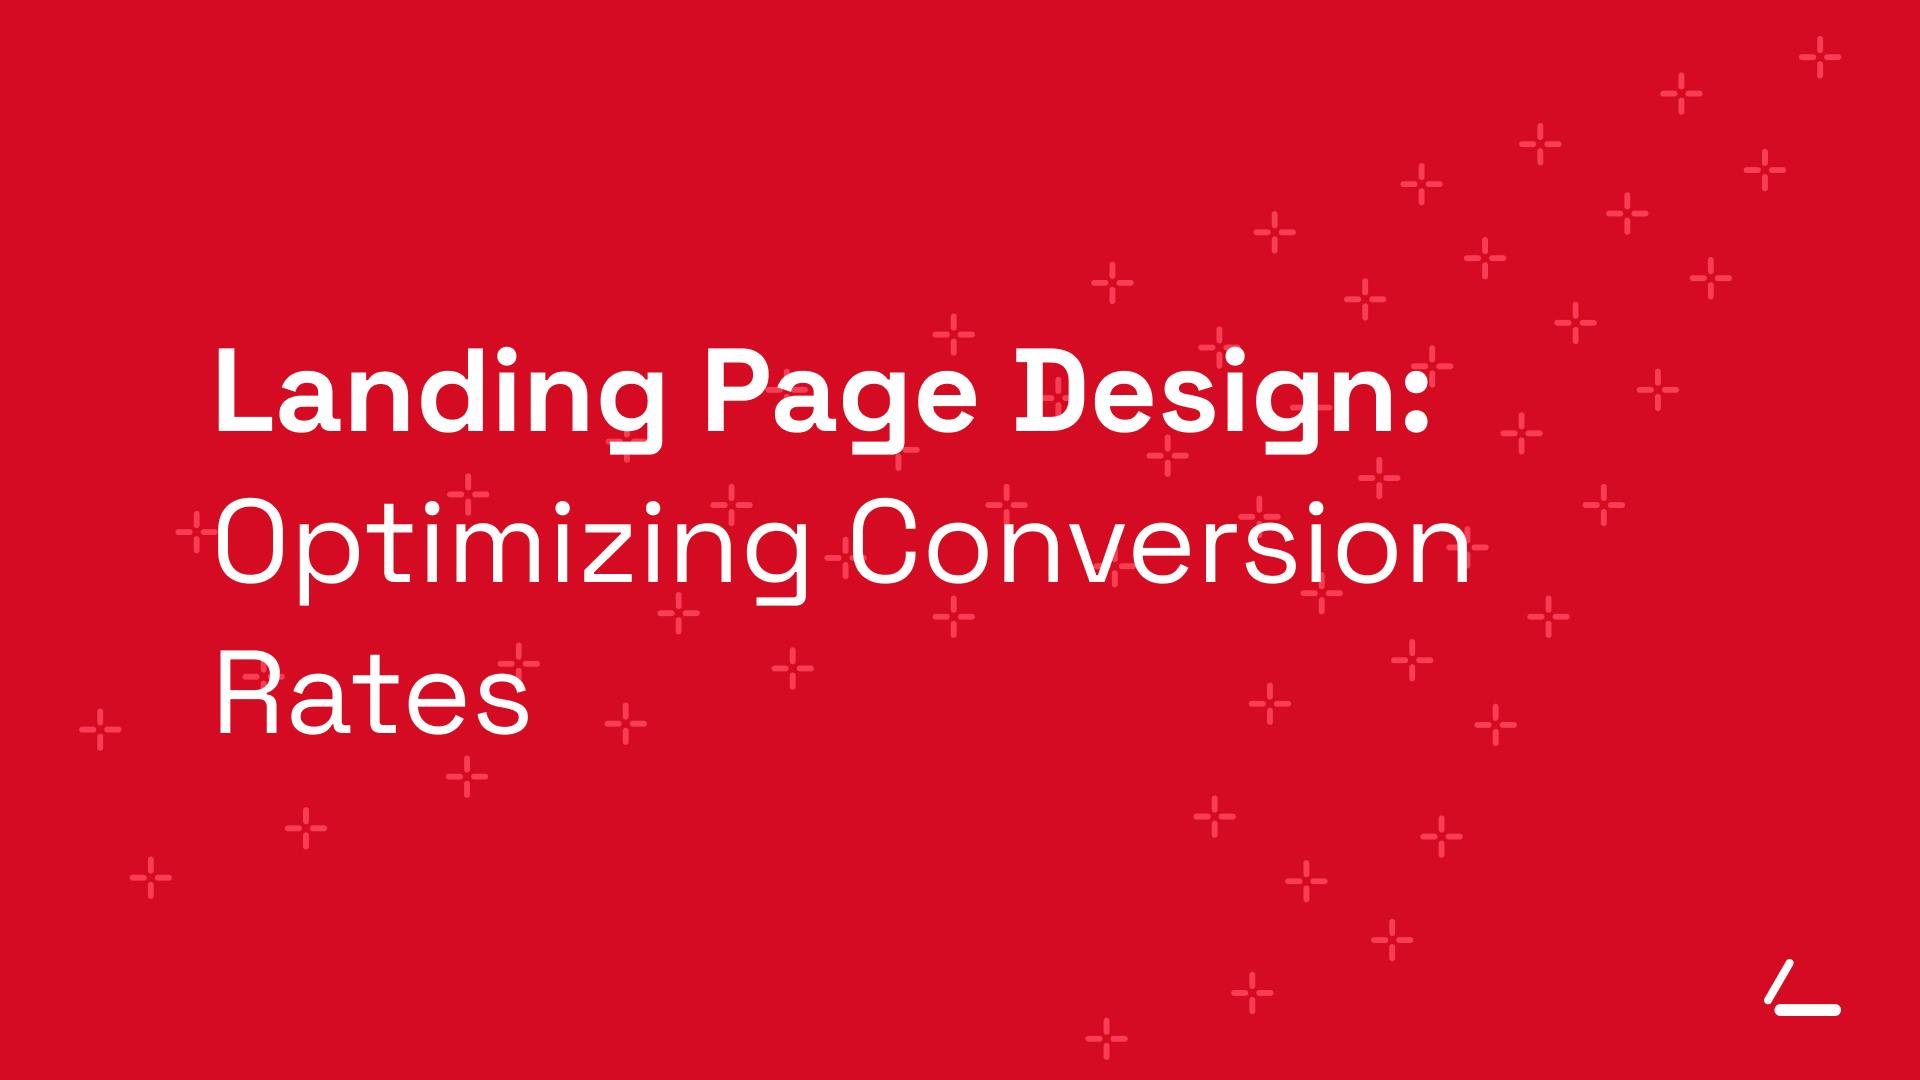 SEO Article Header - Red background with text about Landing Page Design